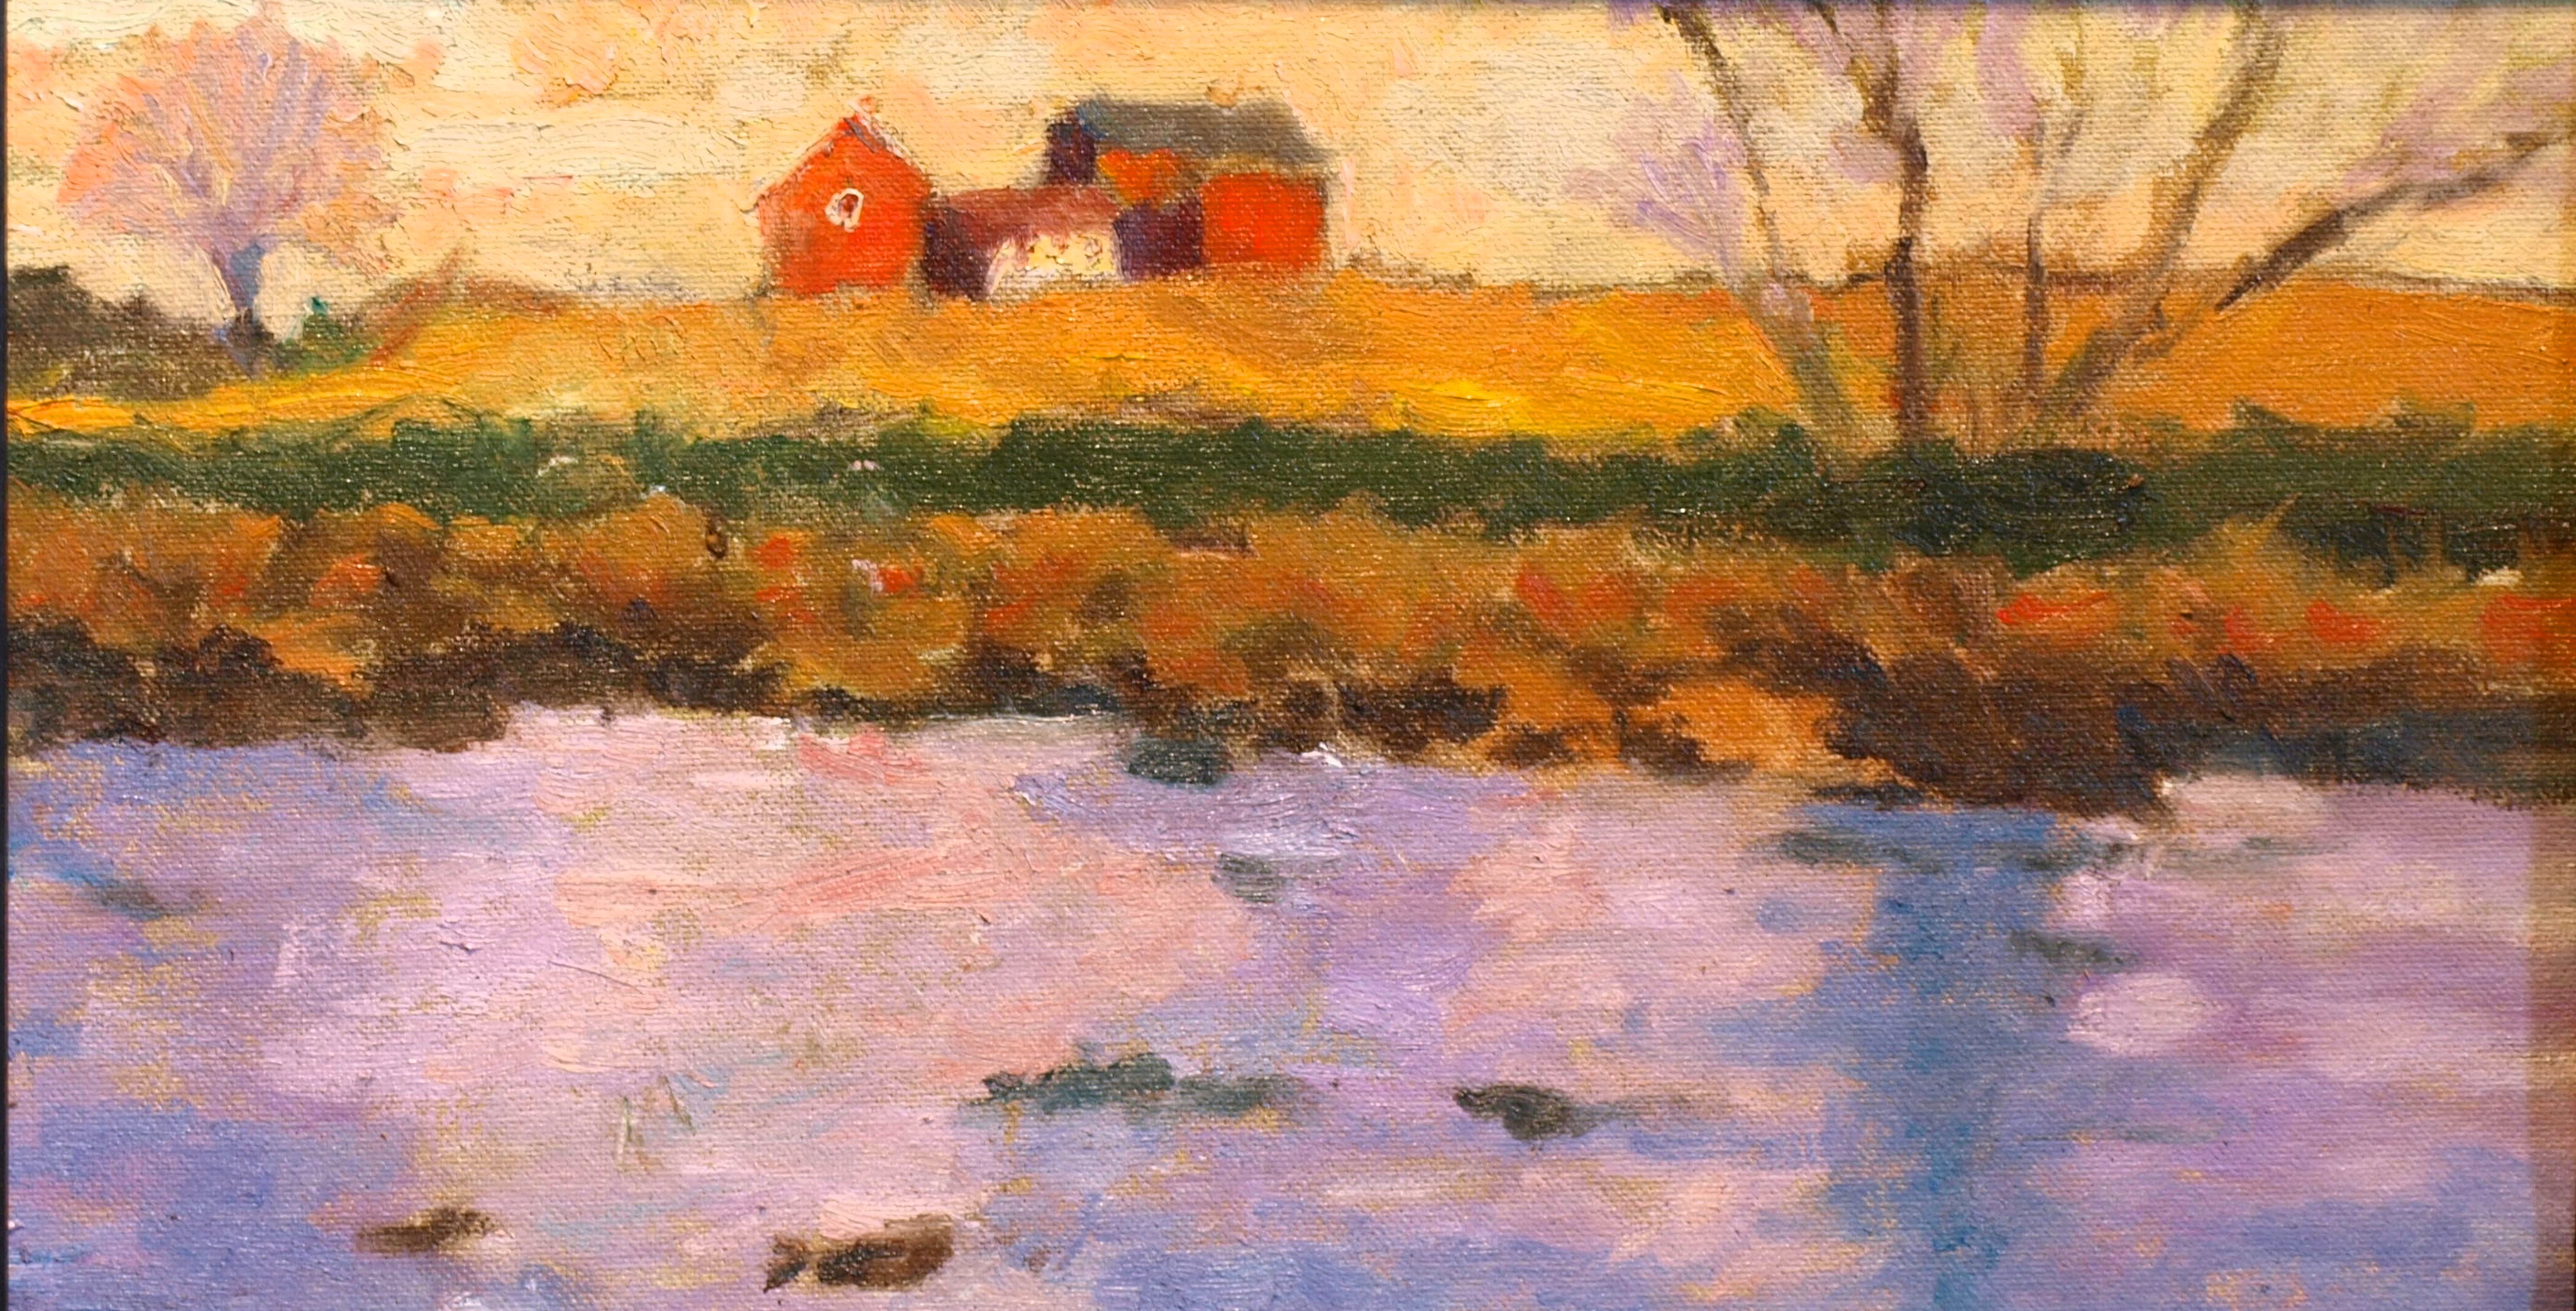 Shoreline Farm, Oil on Canvas on Panel, 8 x 14 Inches, by Richard Stalter, $300